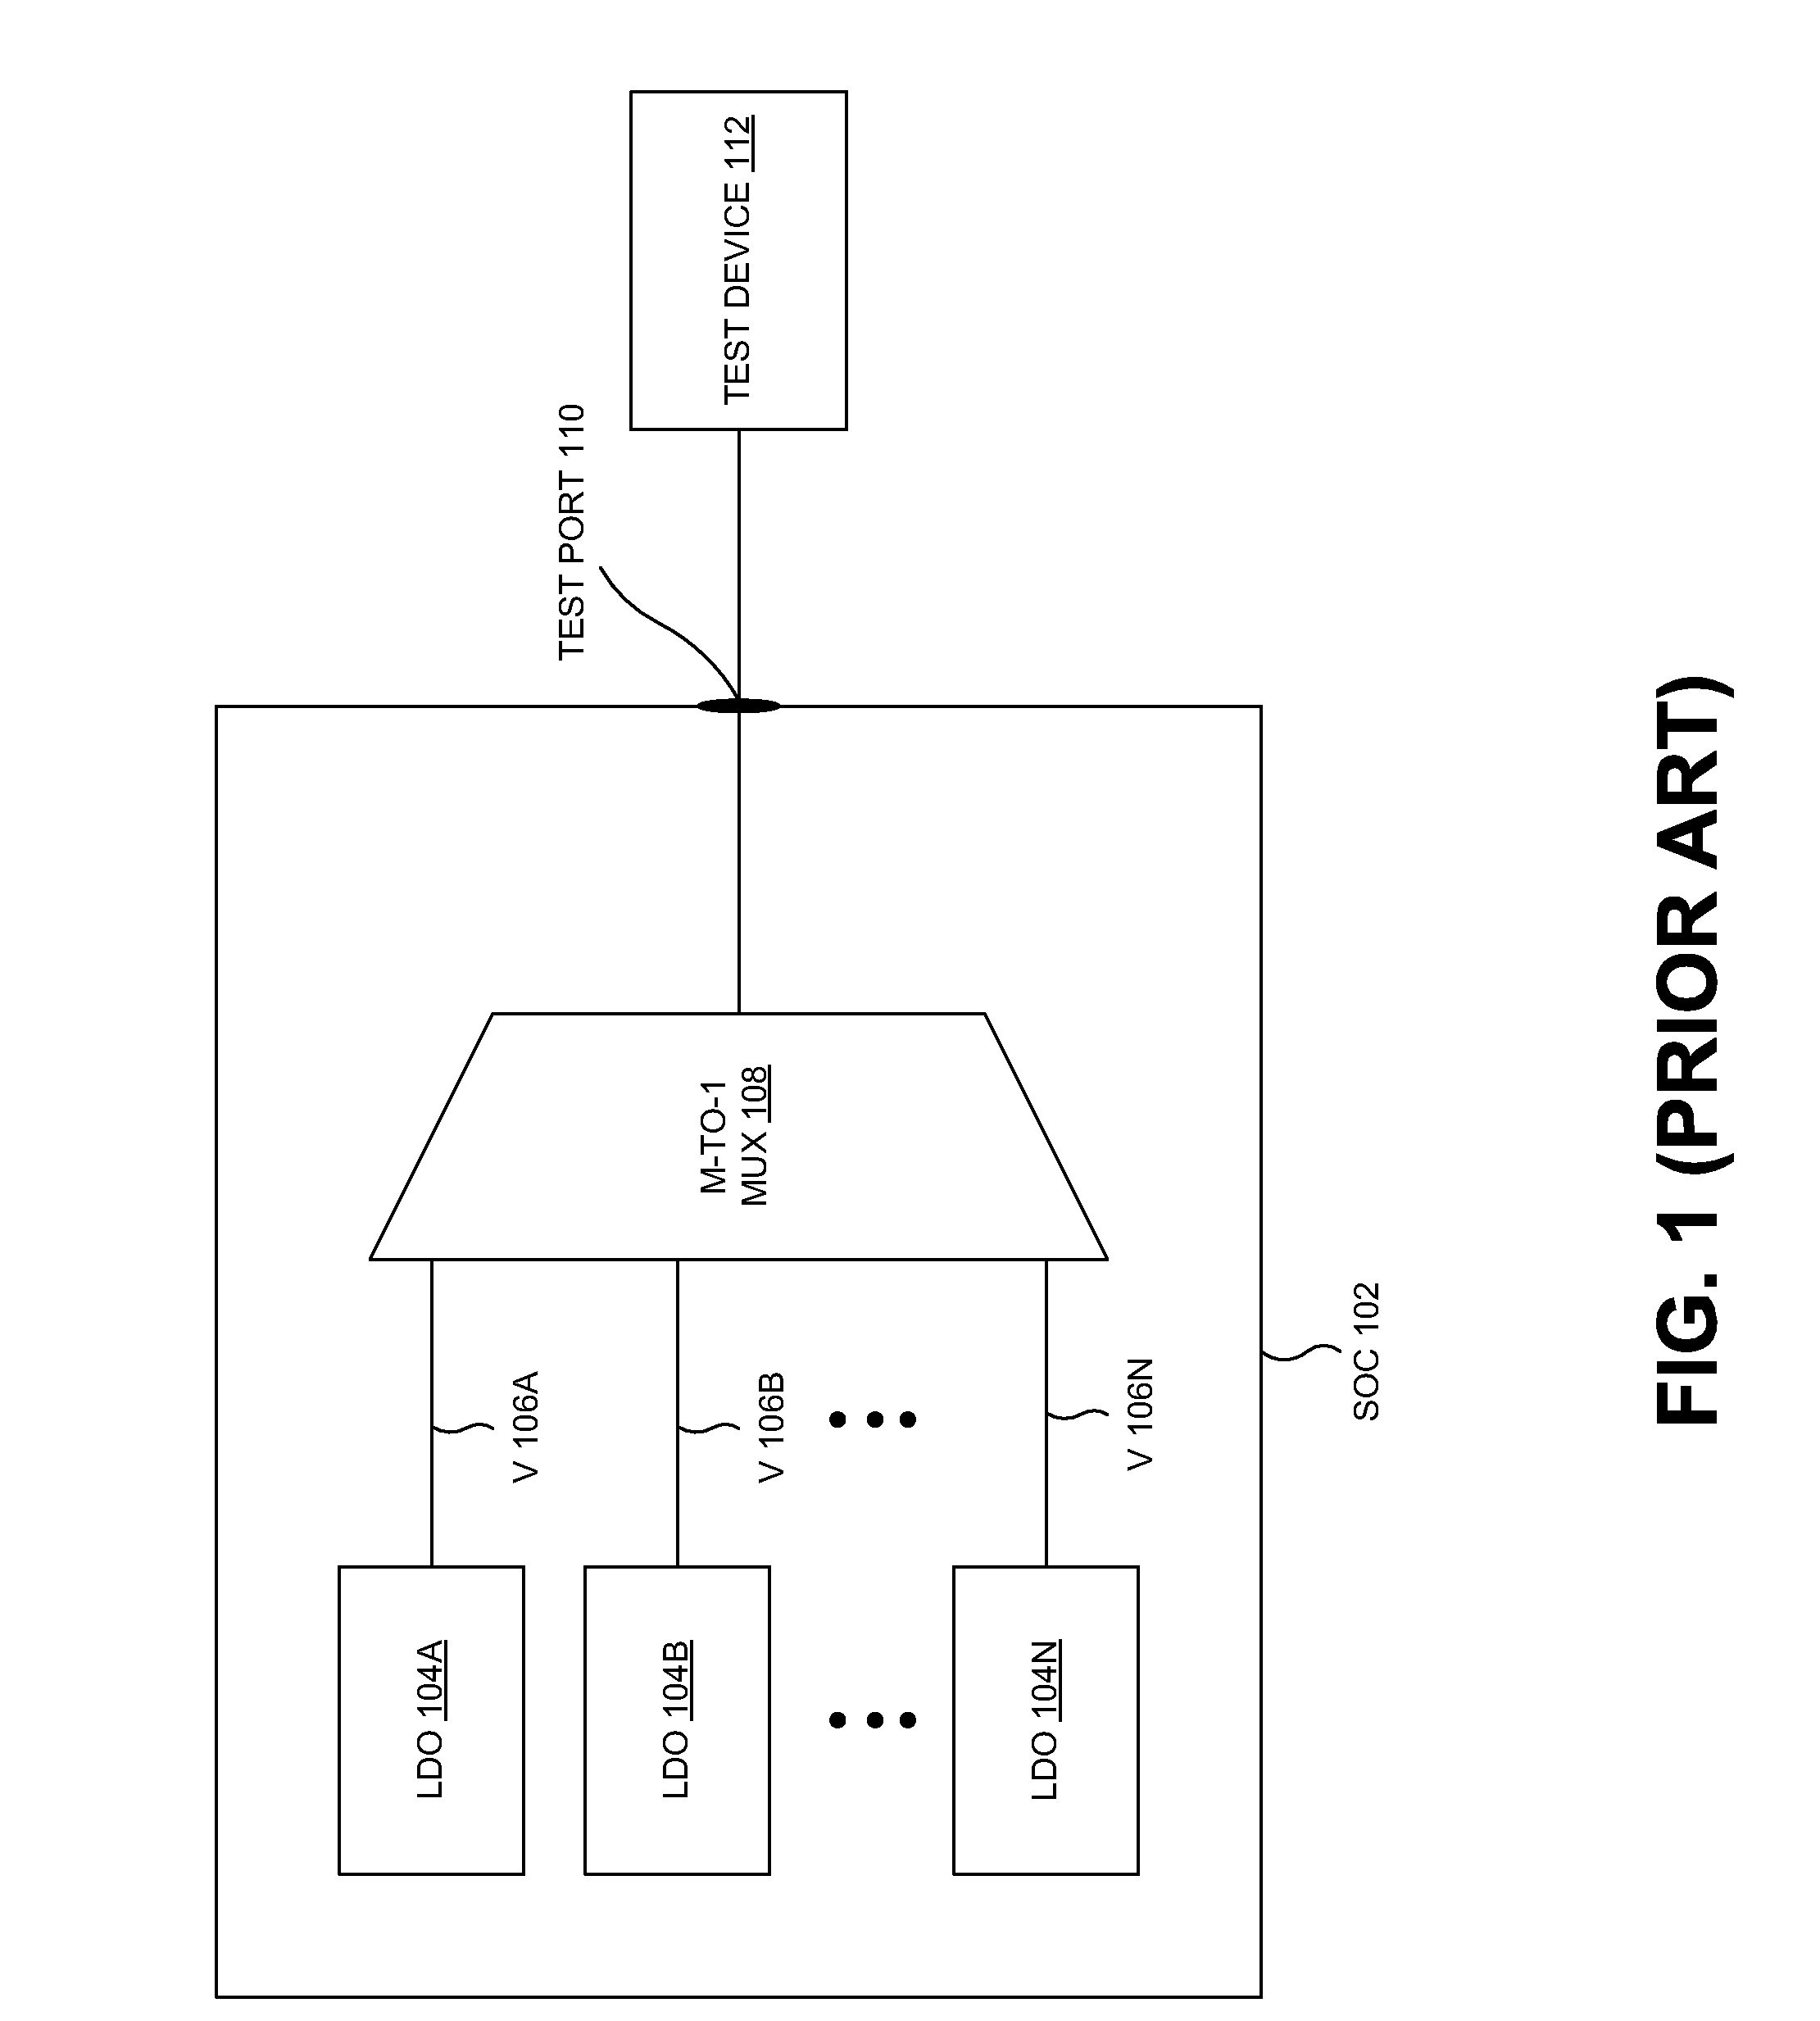 Low dropout regulator testing system and device